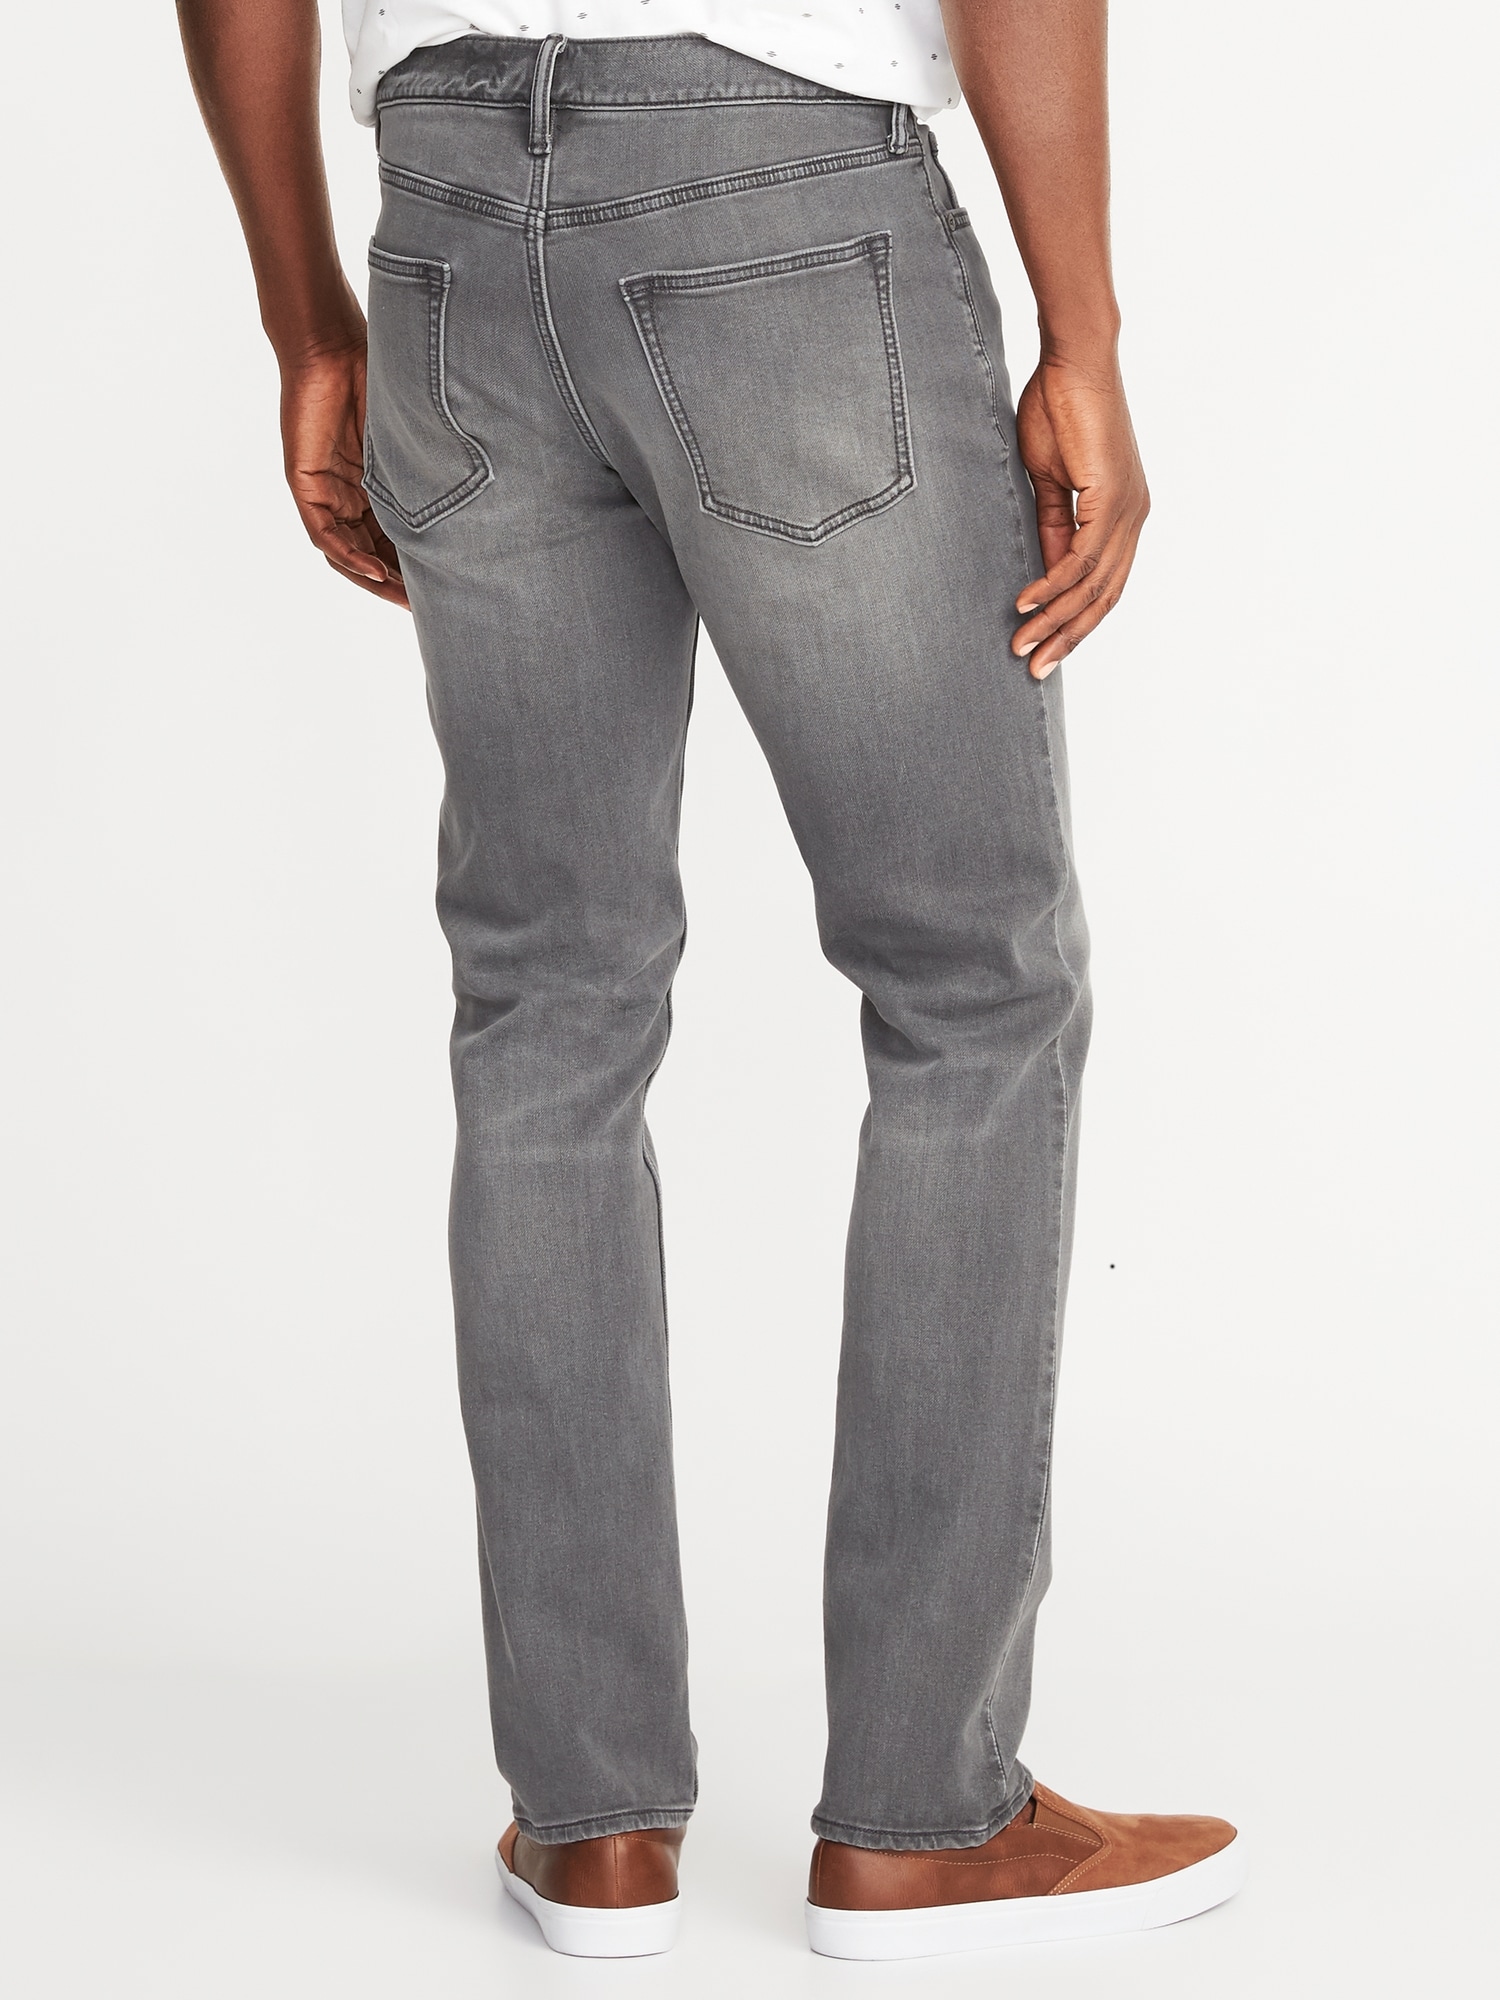 old navy gray jeans